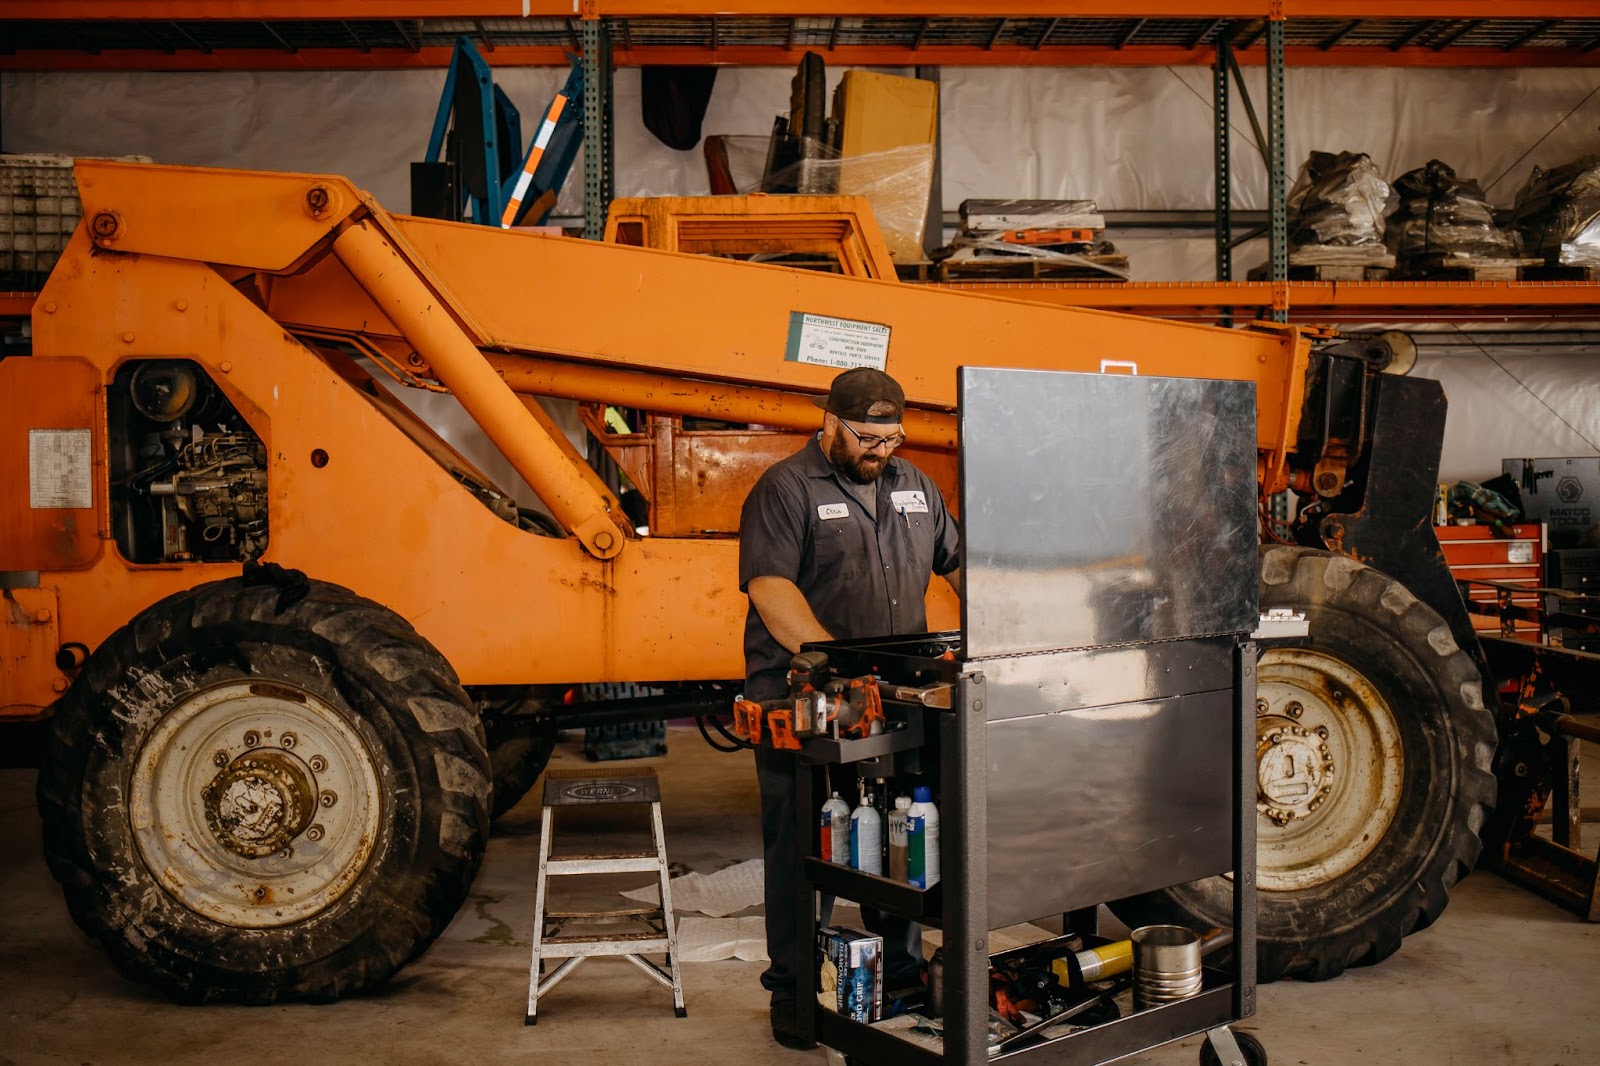 A mechanic looking down at a tray of tools with a giant piece of heavy equipment in the background